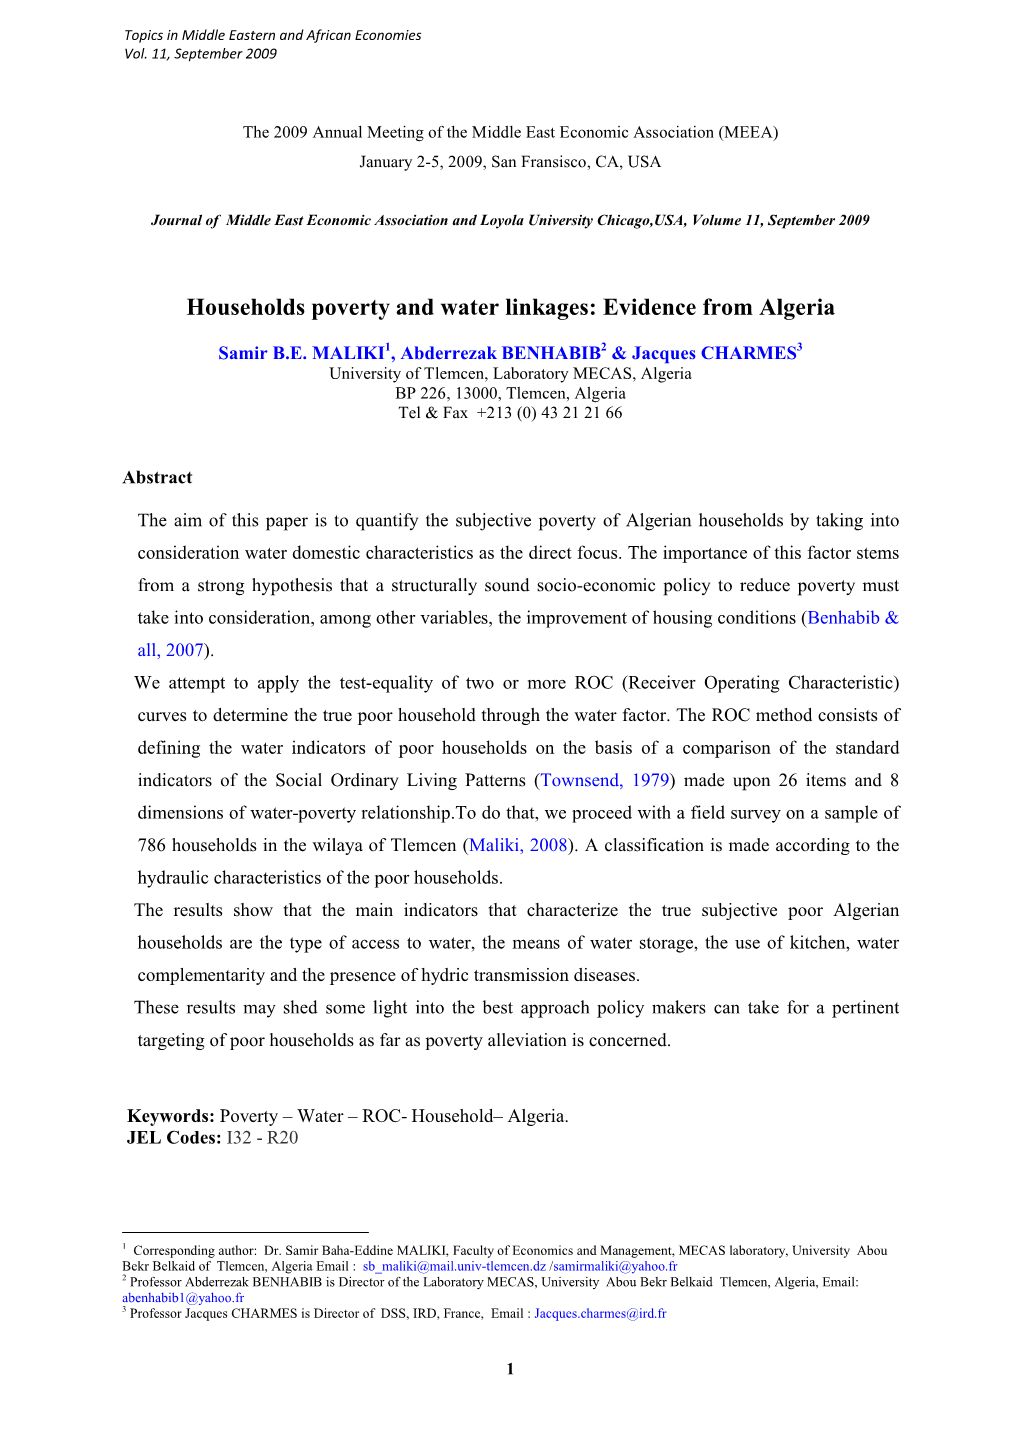 Households Poverty and Water Linkages: Evidence from Algeria